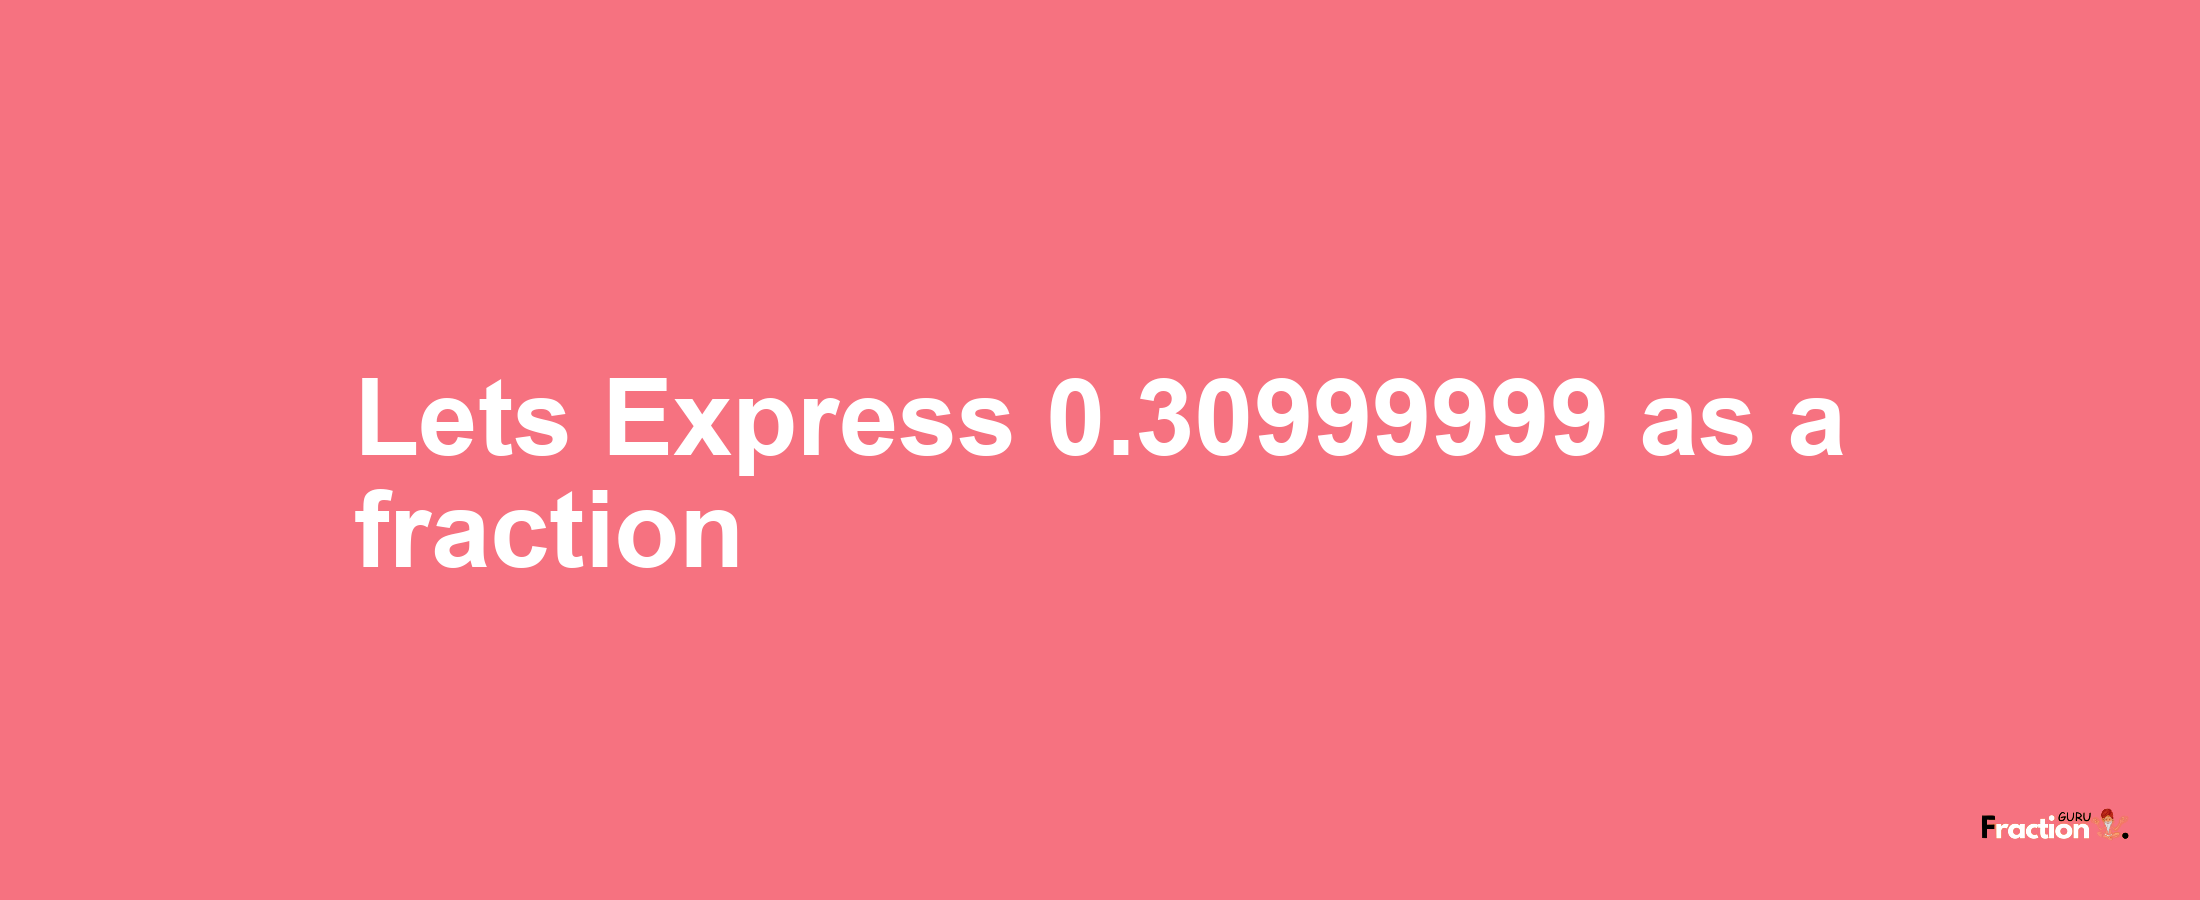 Lets Express 0.30999999 as afraction